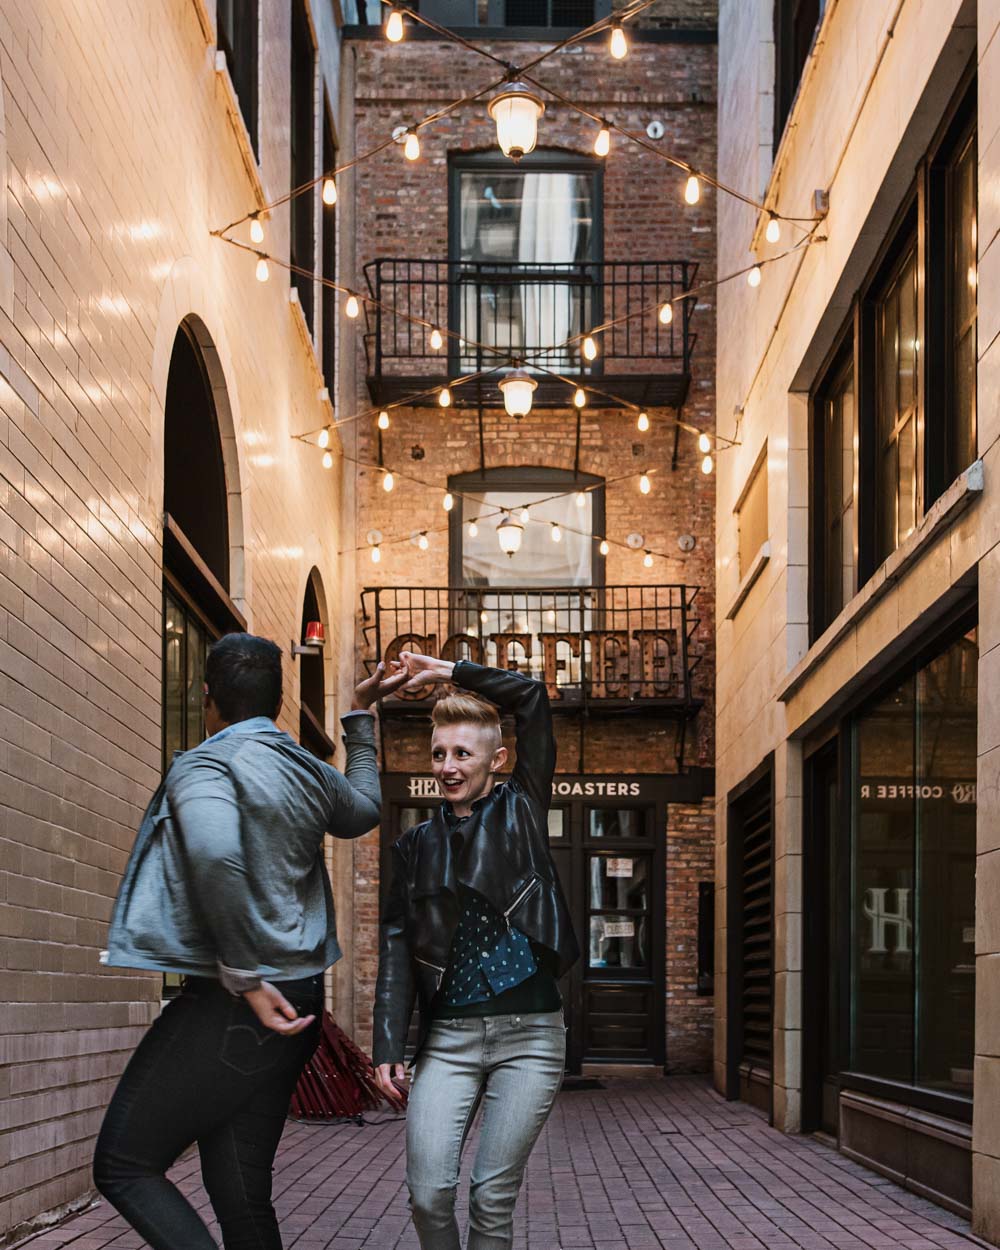 Danika + Cassidy: a Chicago engagement photoshoot with salsa dancing by Victoria McDonald Photography interracial LGBTQ+ couple